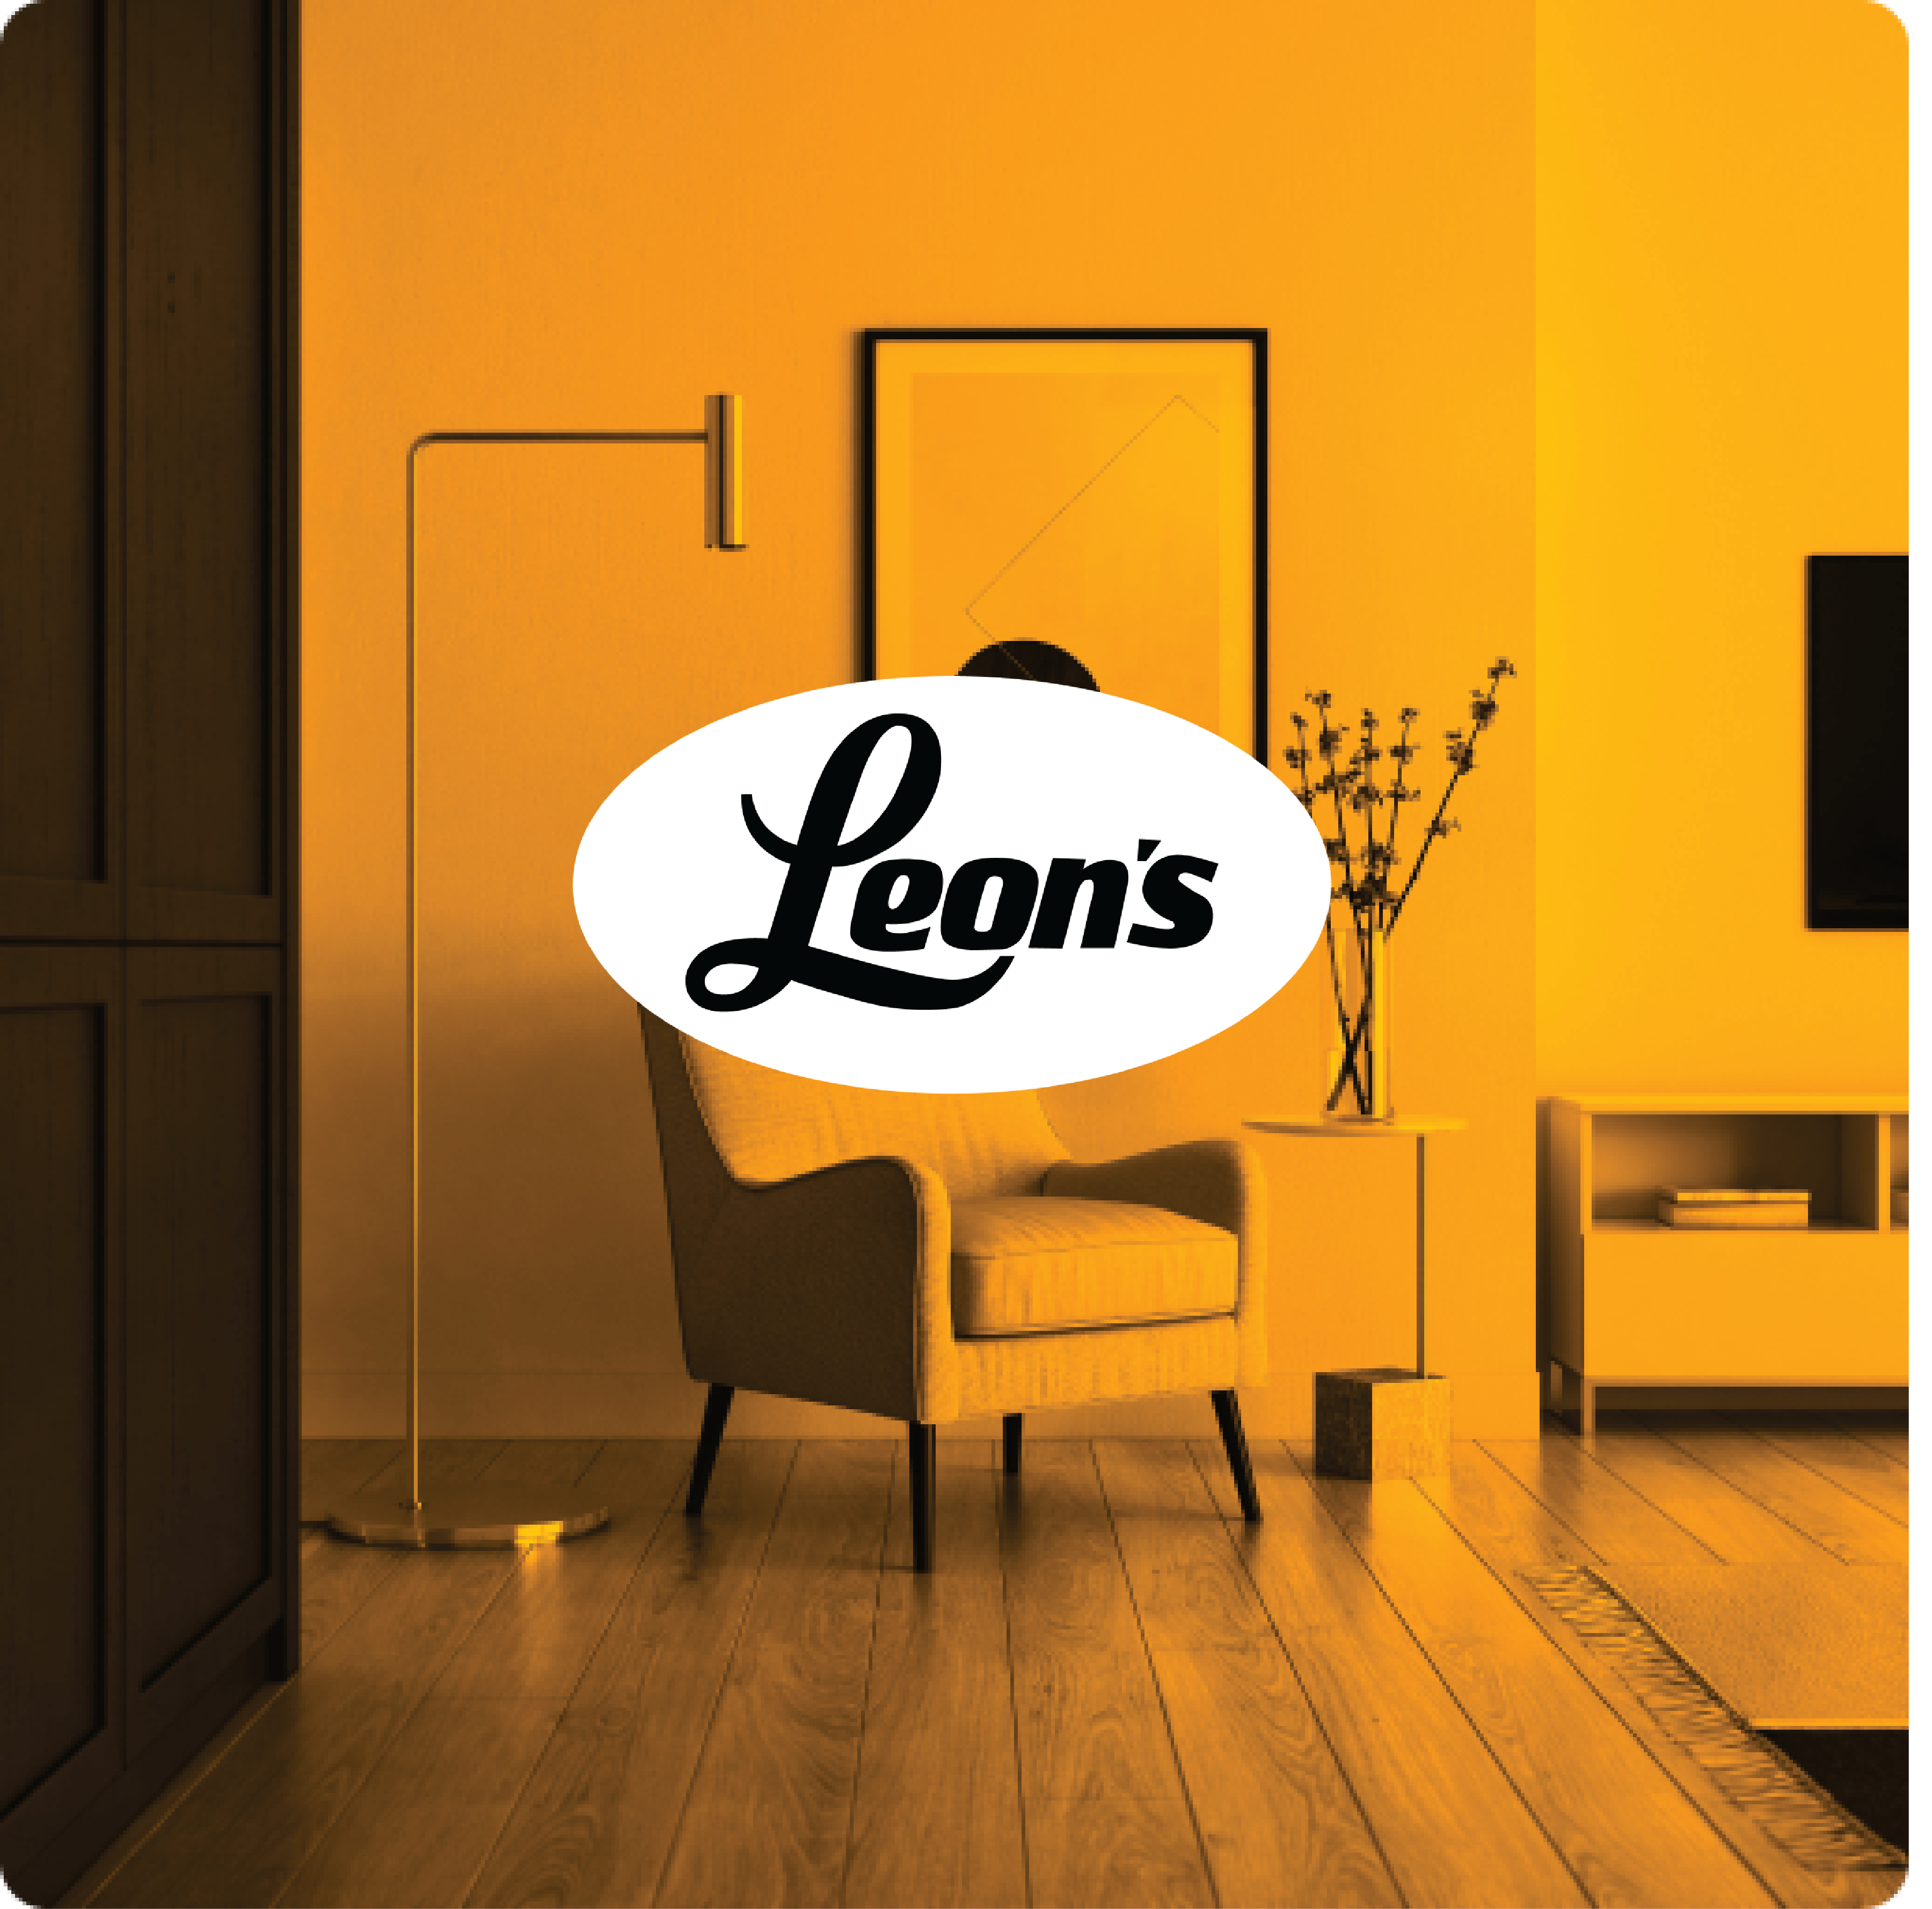 Leon's logo against a background of a living room.